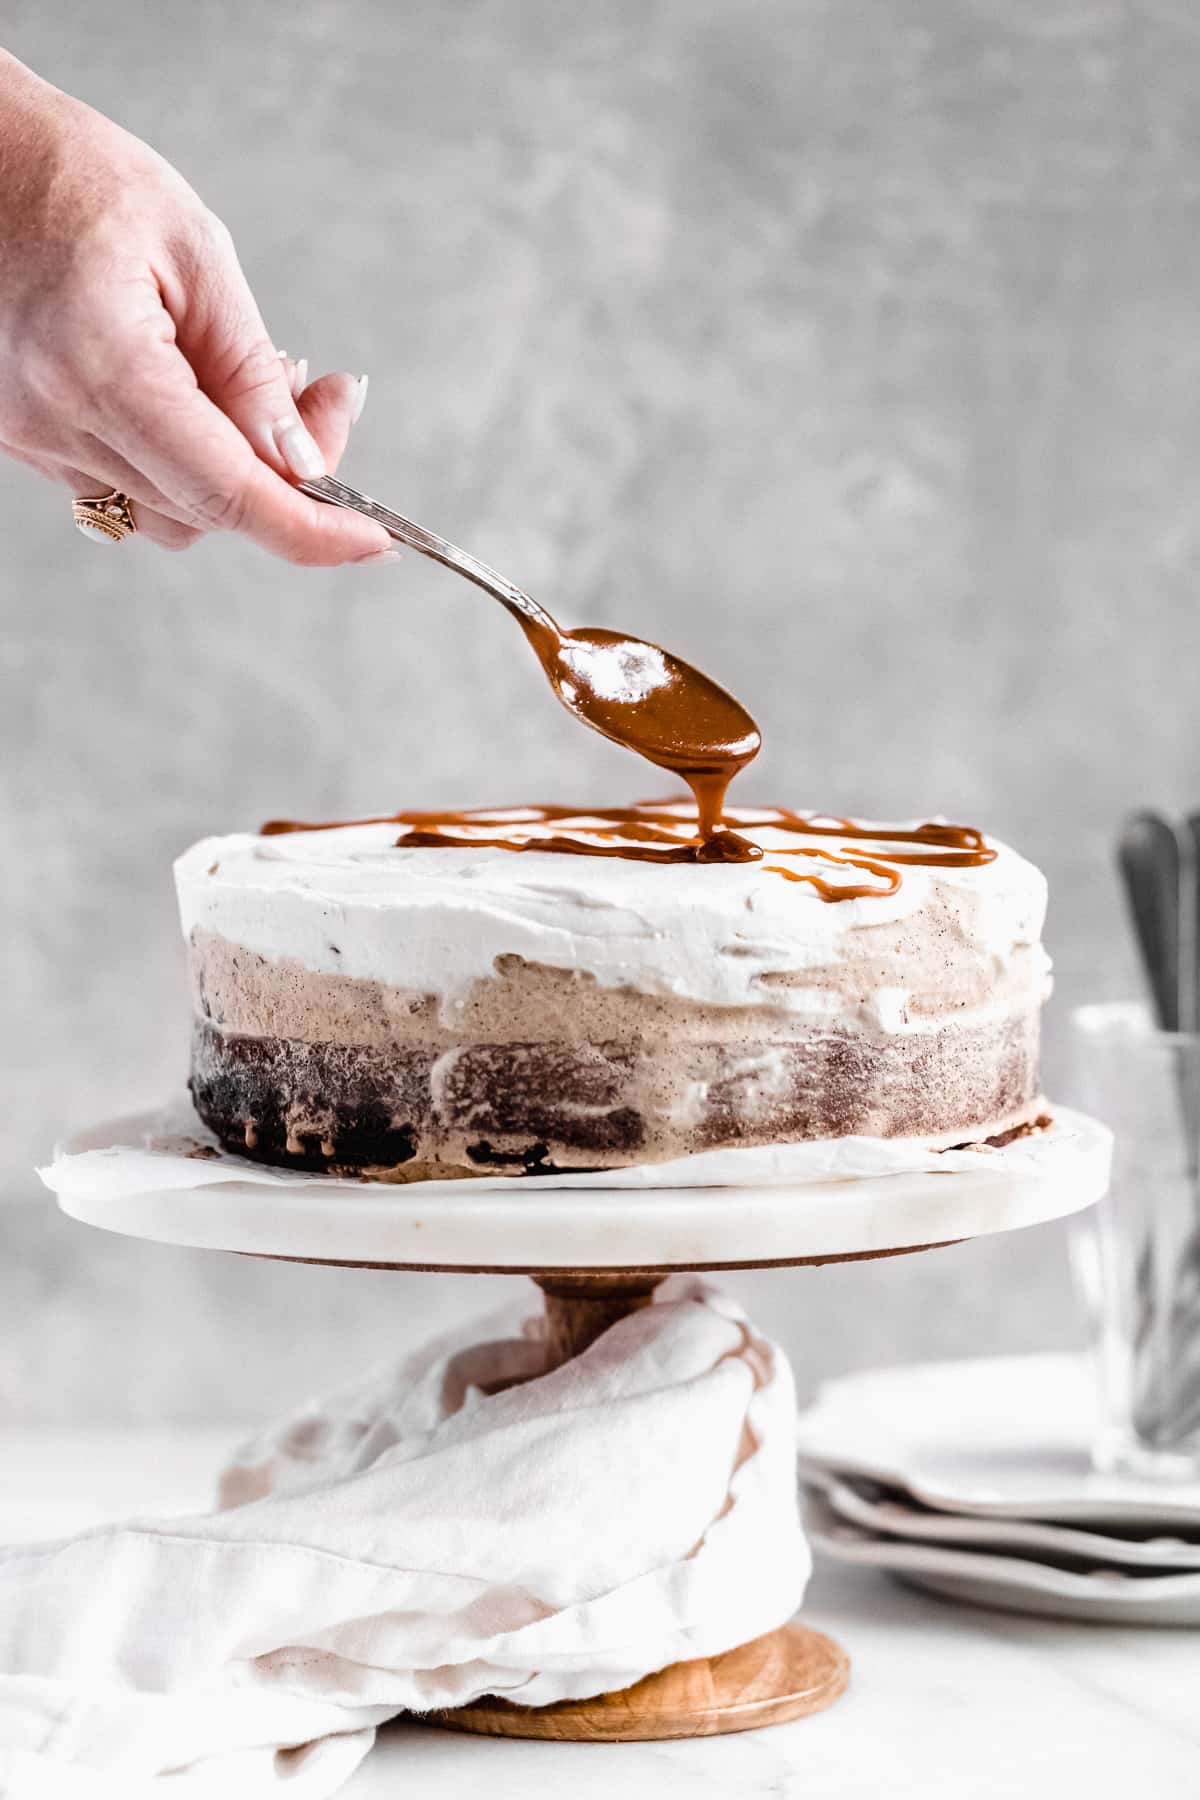 Side view photo of the Chocolate Espresso Gluten-free Ice Cream Cake sitting on a white marble cake plate.  A hand holds a spoon above that is drizzling the caramel sauce on the top of the cake.  Some small plates and utensils can be seen in the background.  